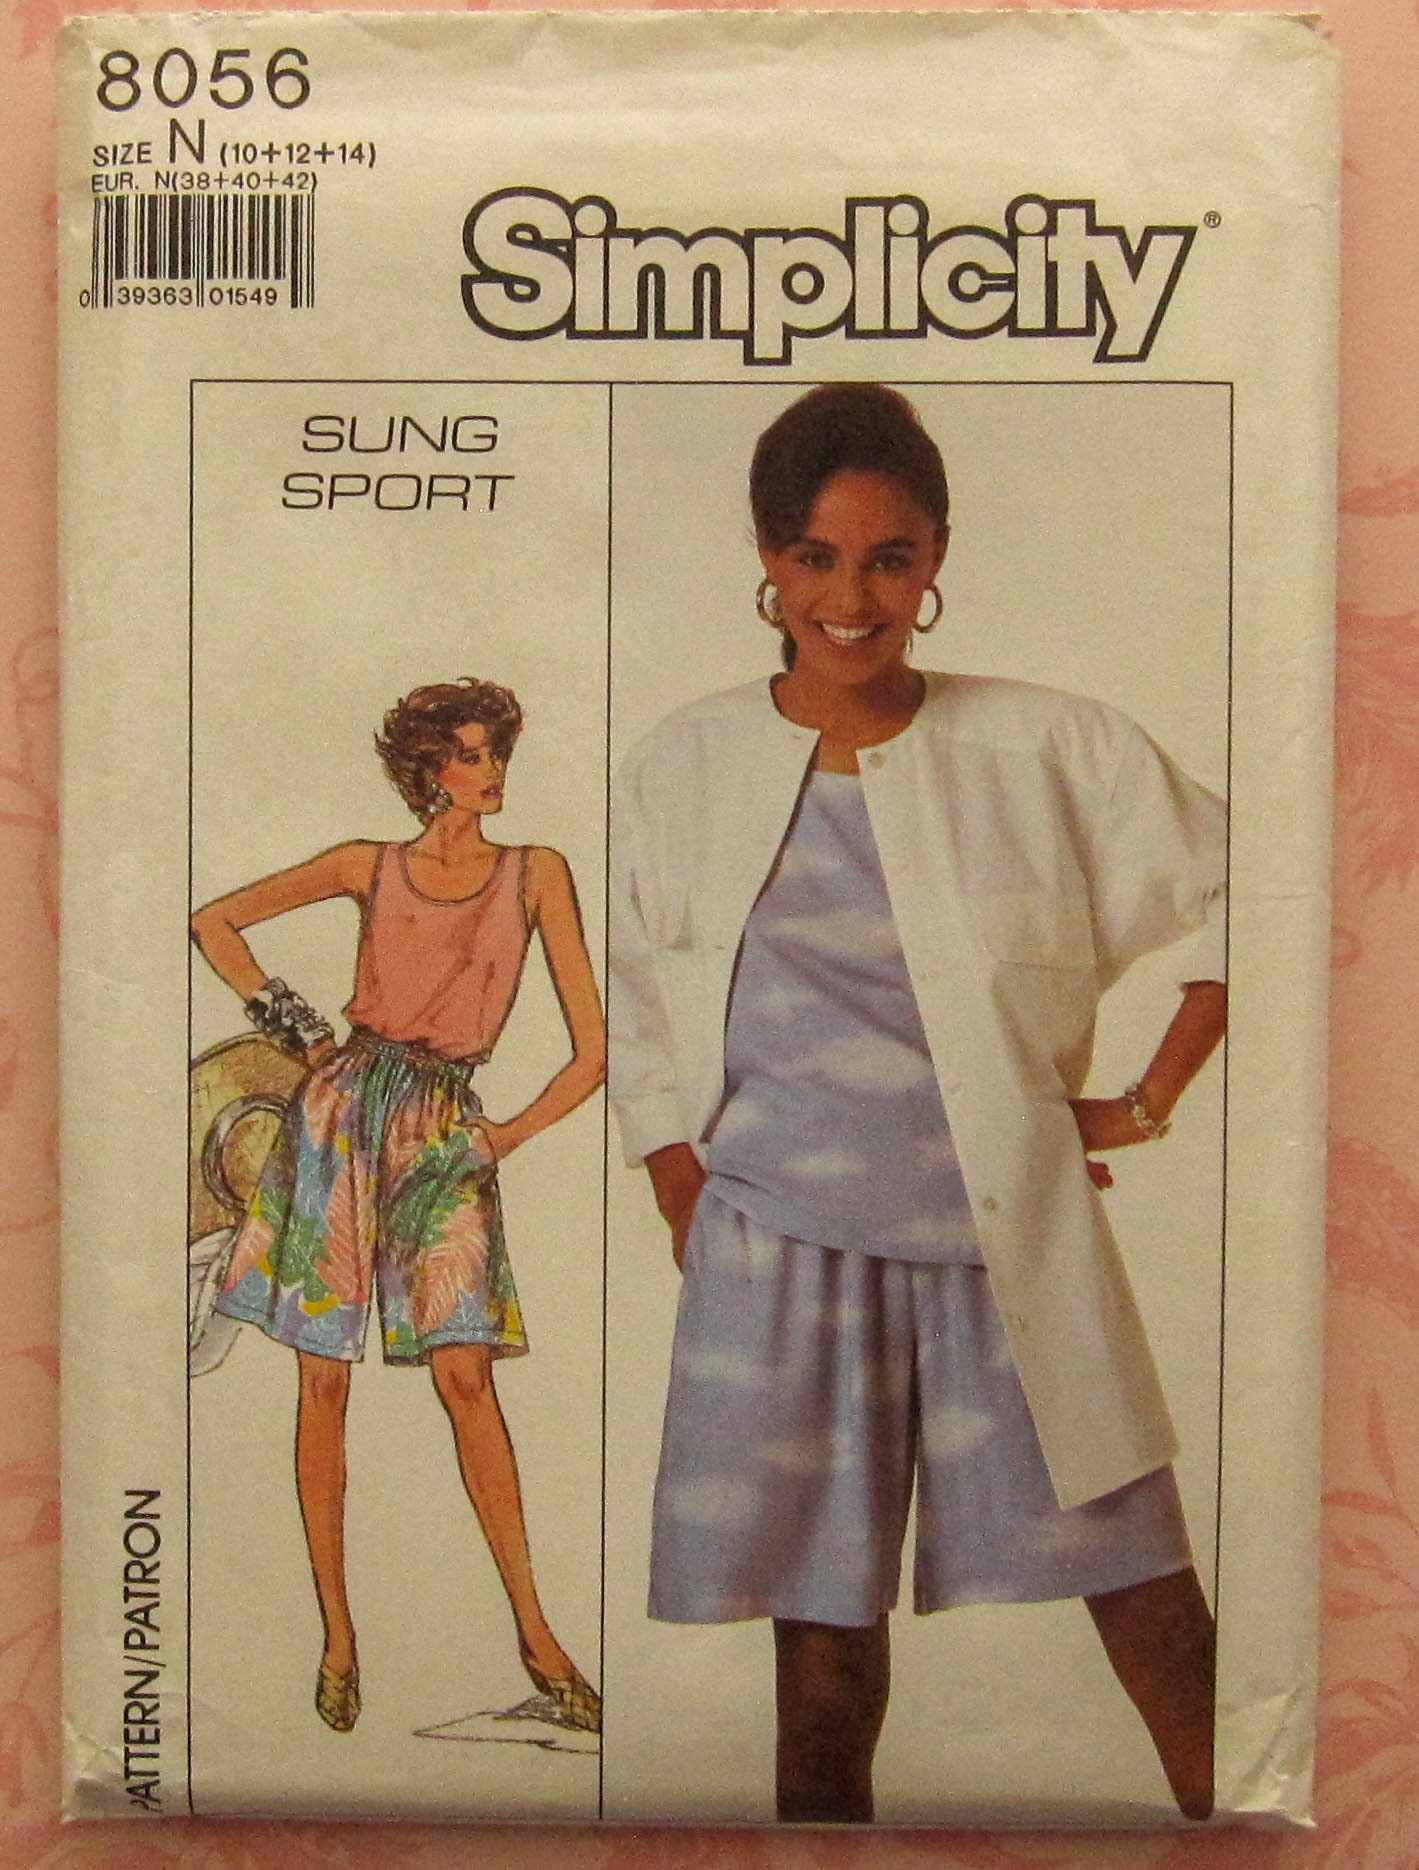 Vintage 80s Sewing Pattern Womens Sizes 10 12 14 UNCUT - Etsy